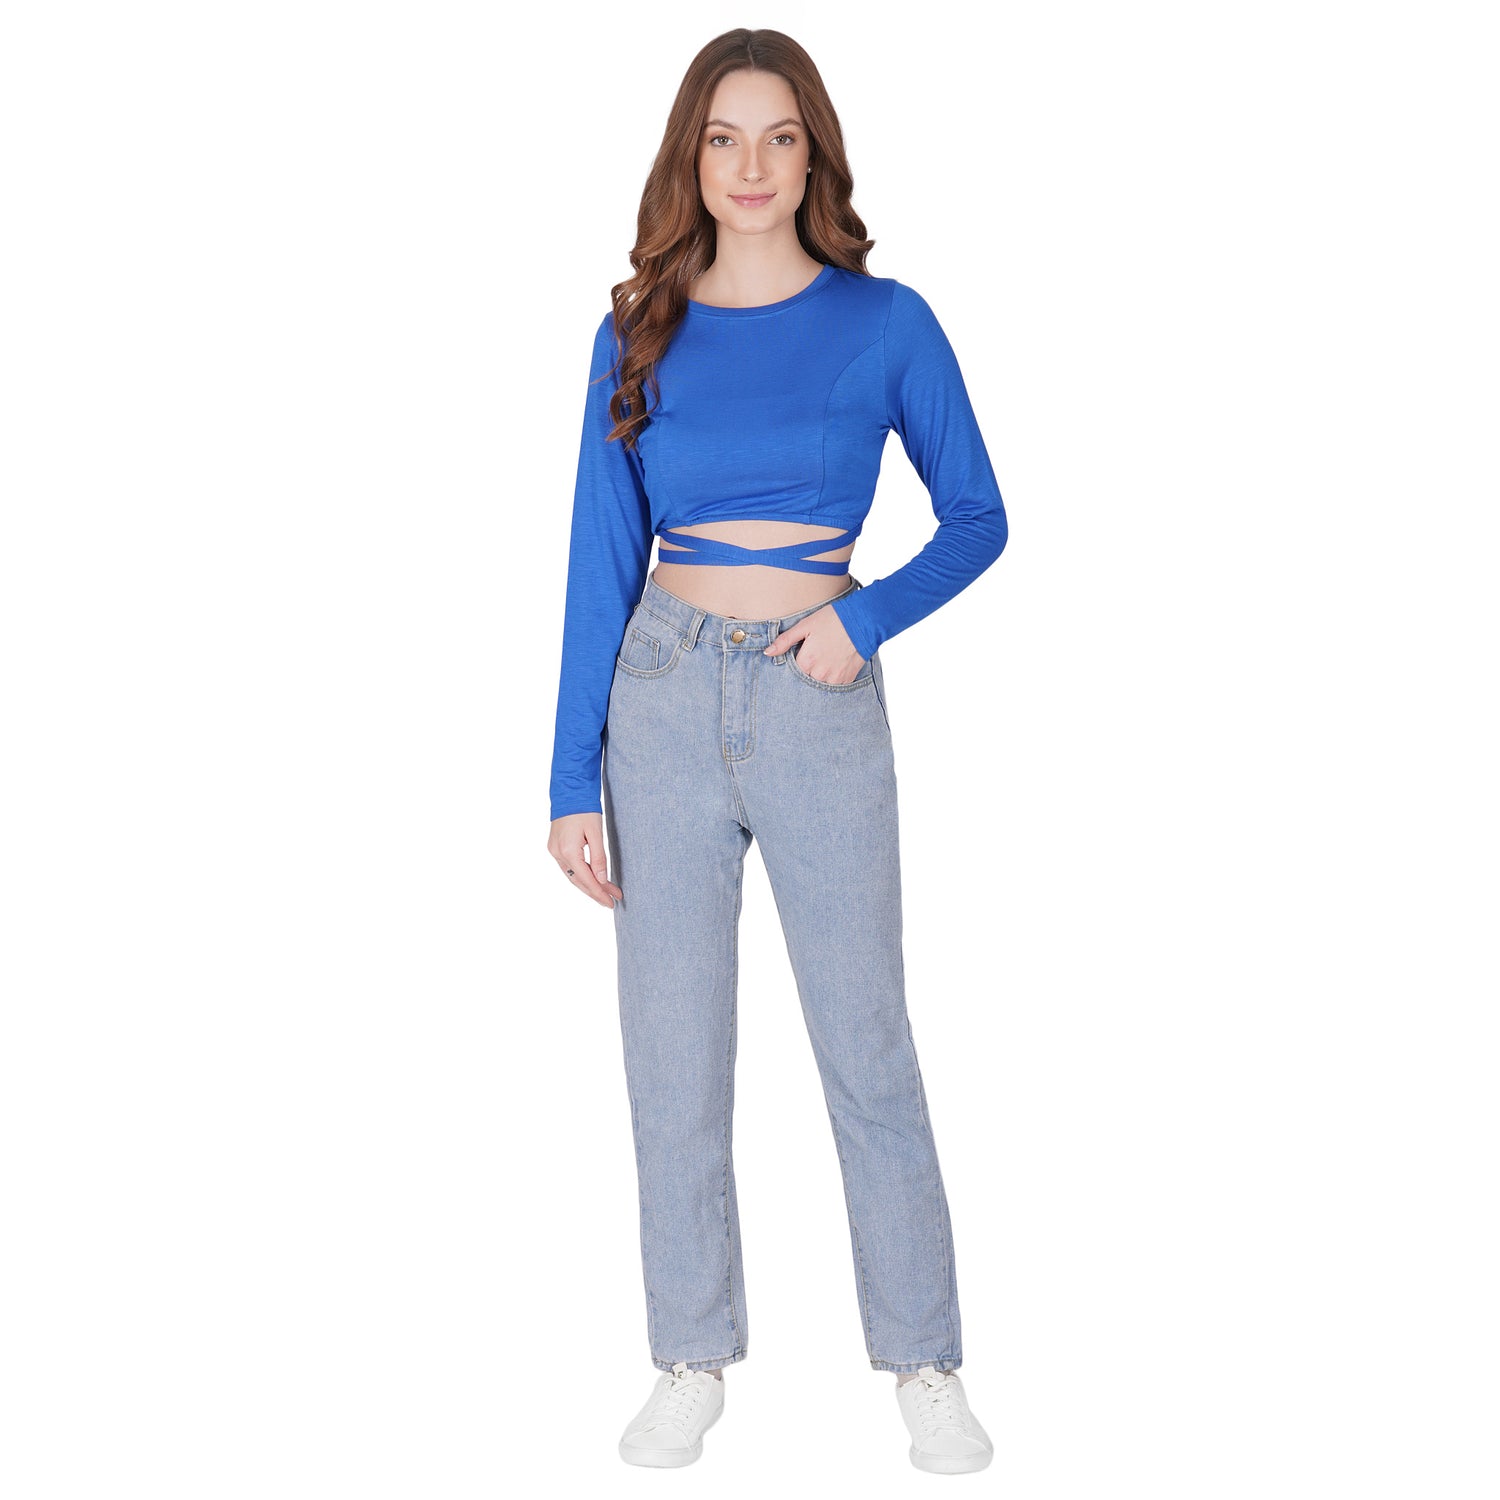 SLAY. Women's Blue Full Sleeves Crop Top with Back Wrap around Strings-clothing-to-slay.myshopify.com-Crop Top